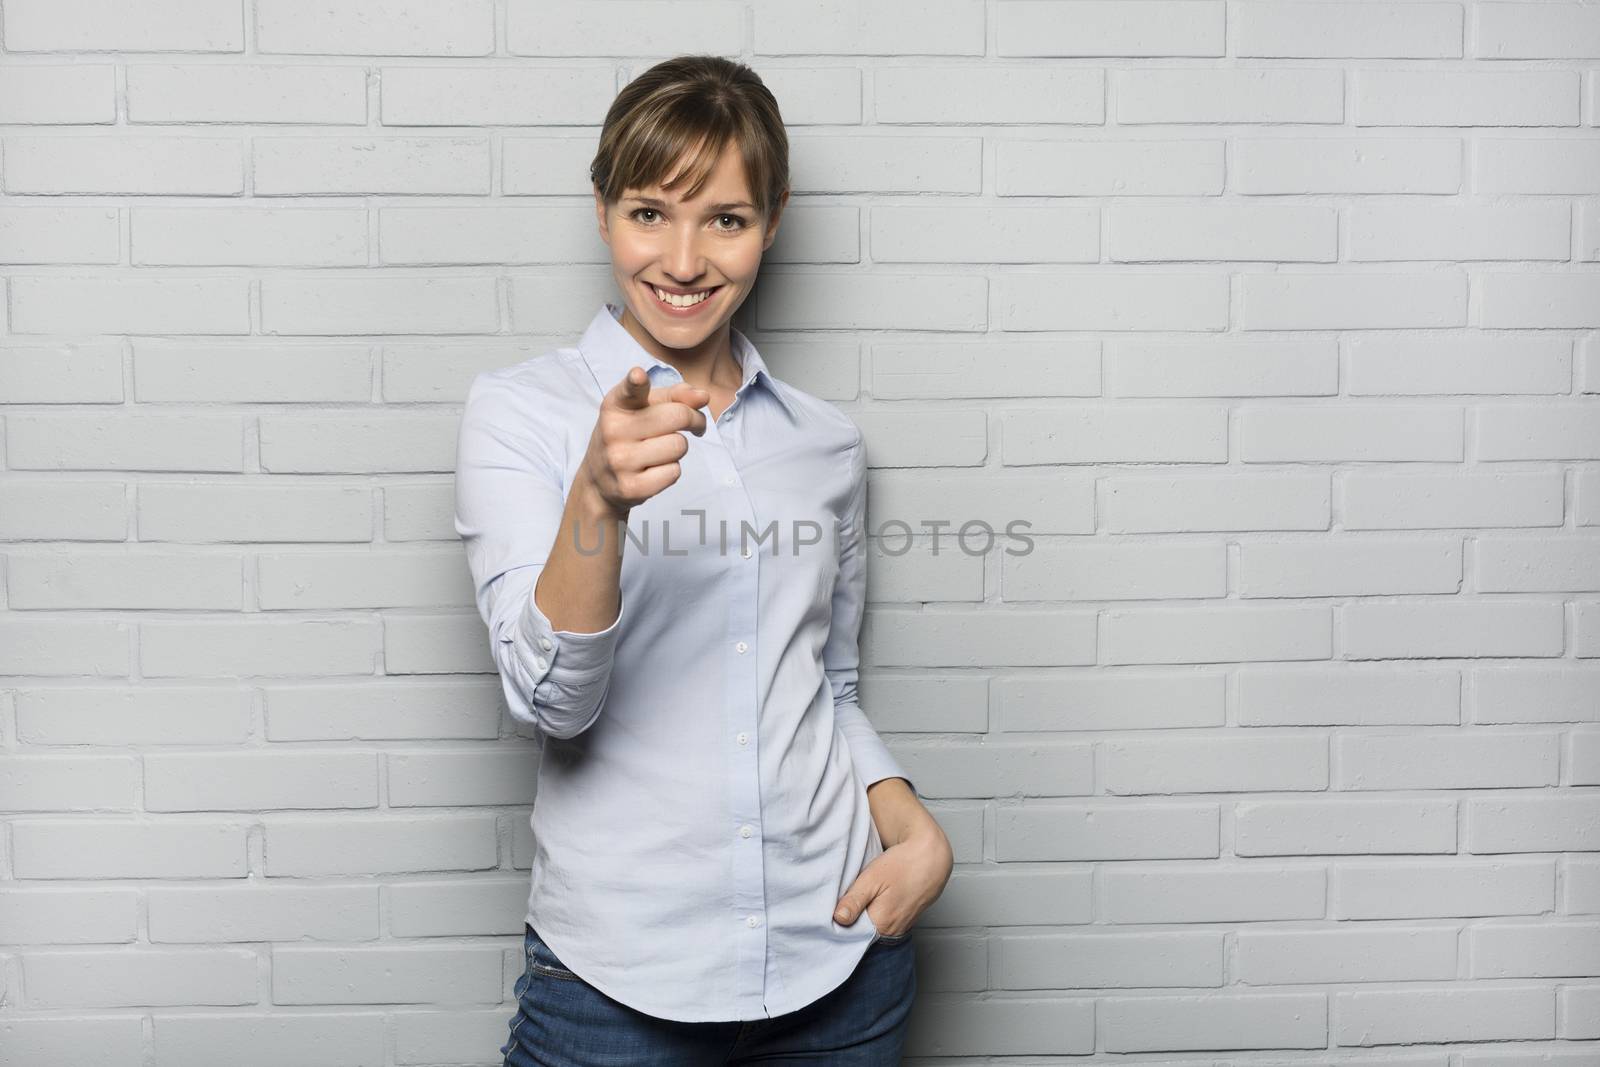 Smiling Cute woman pointing a finger in front of brick wall by LDProd